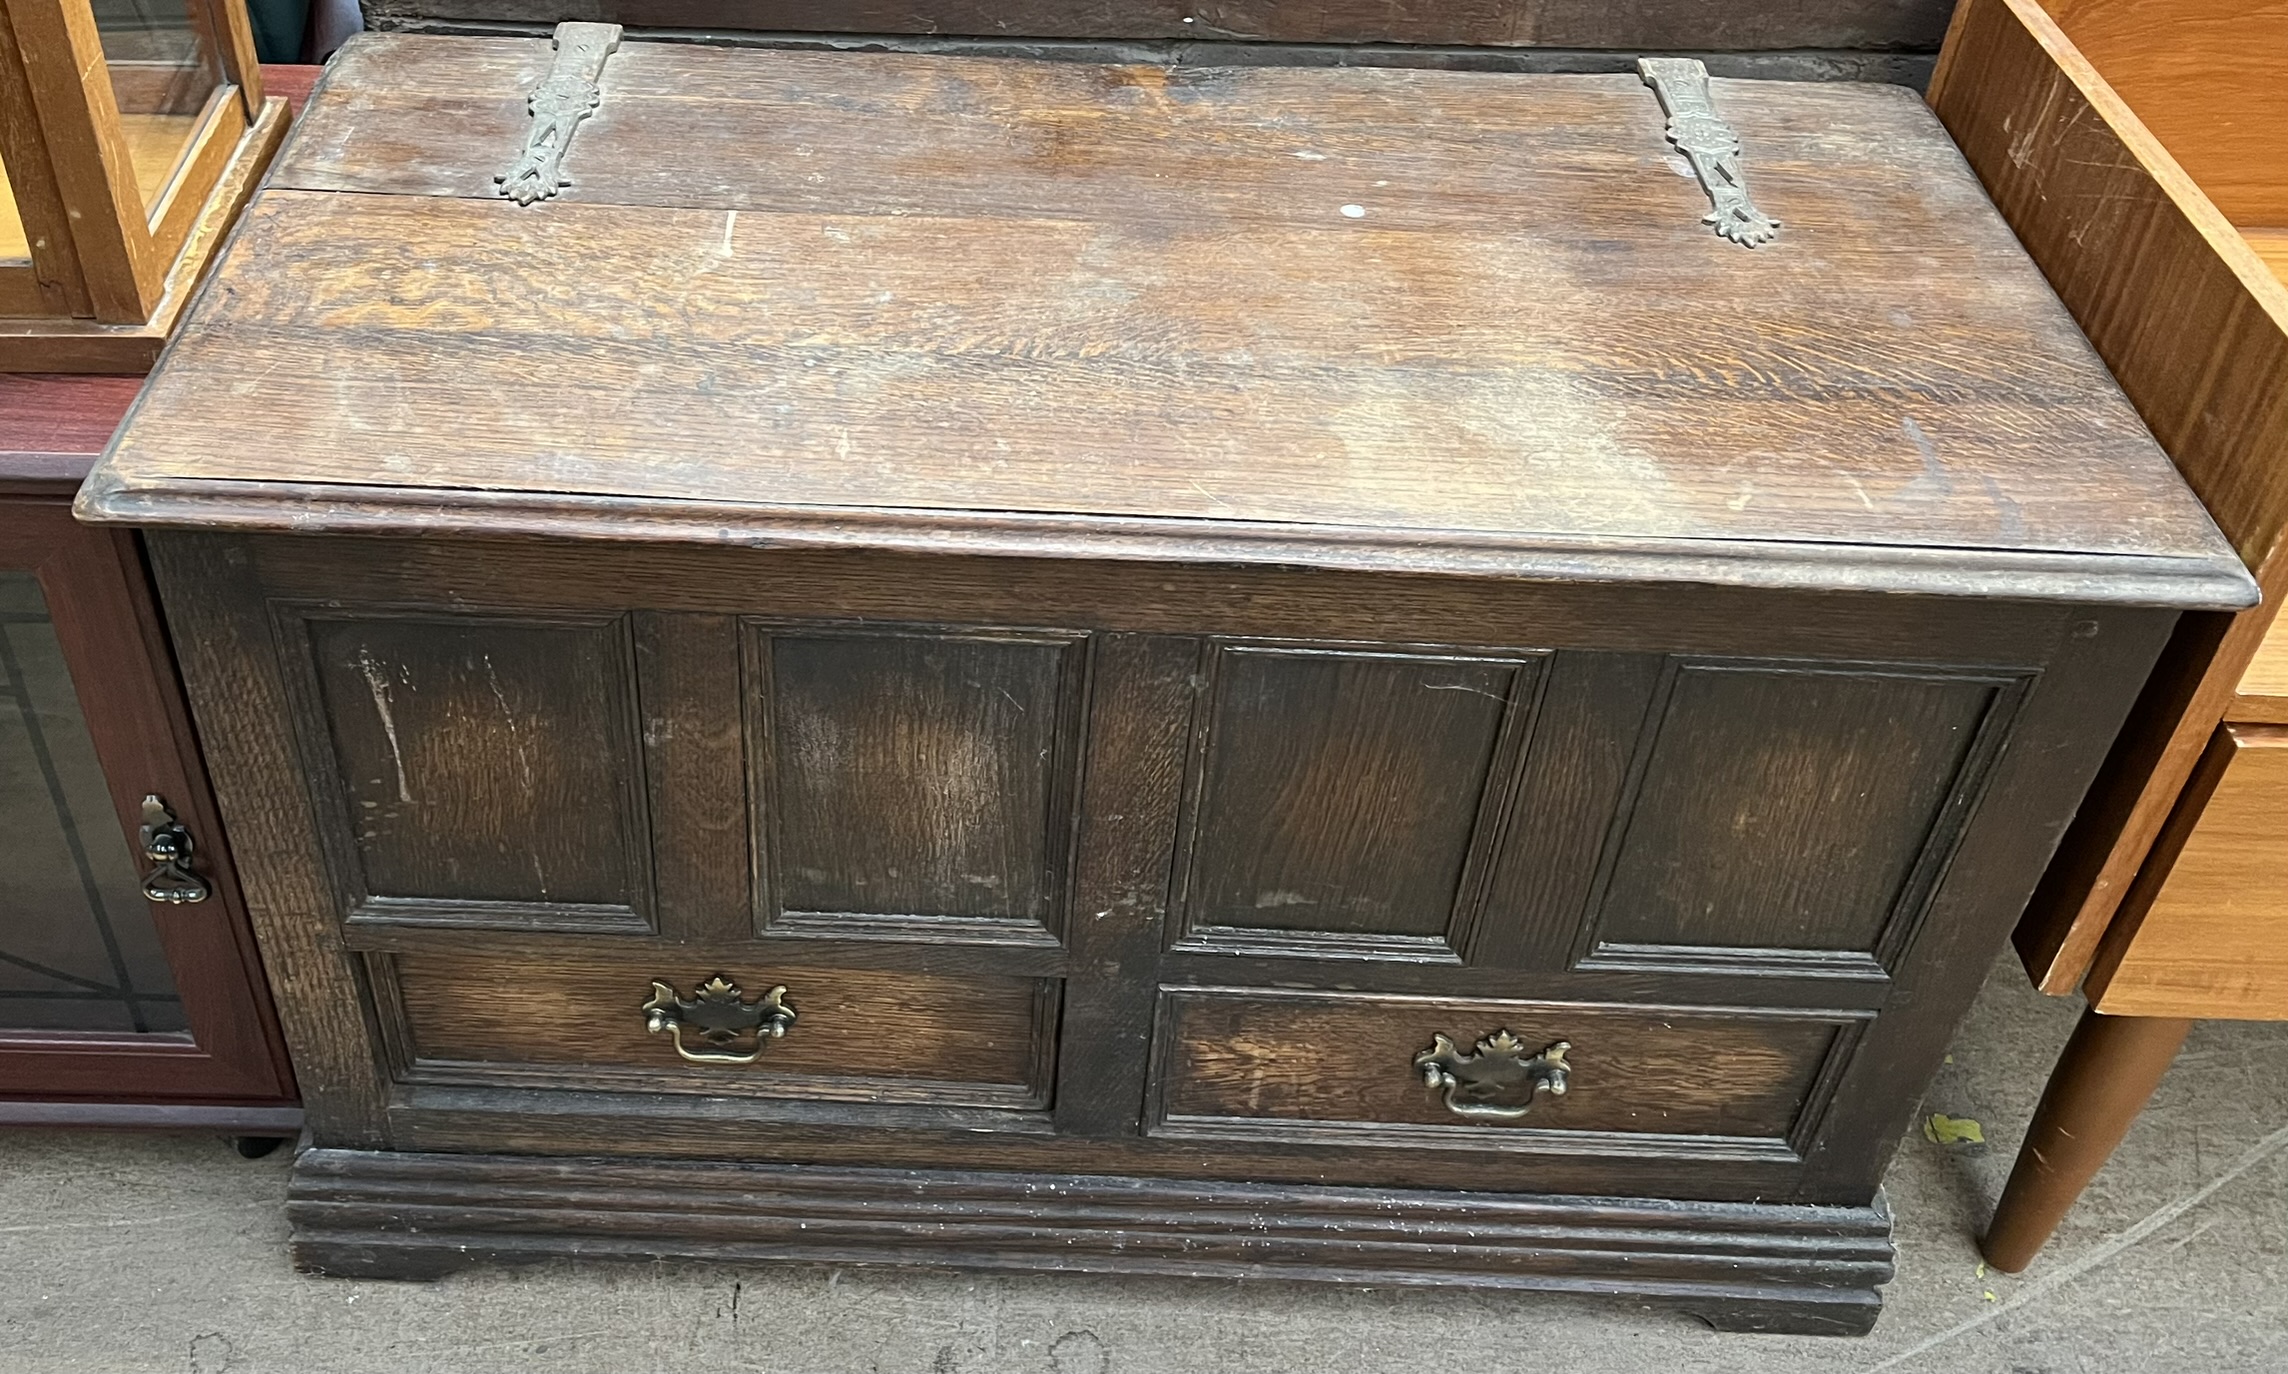 A 20th century oak coffer with a planked top and panelled front with drawers on bracket feet